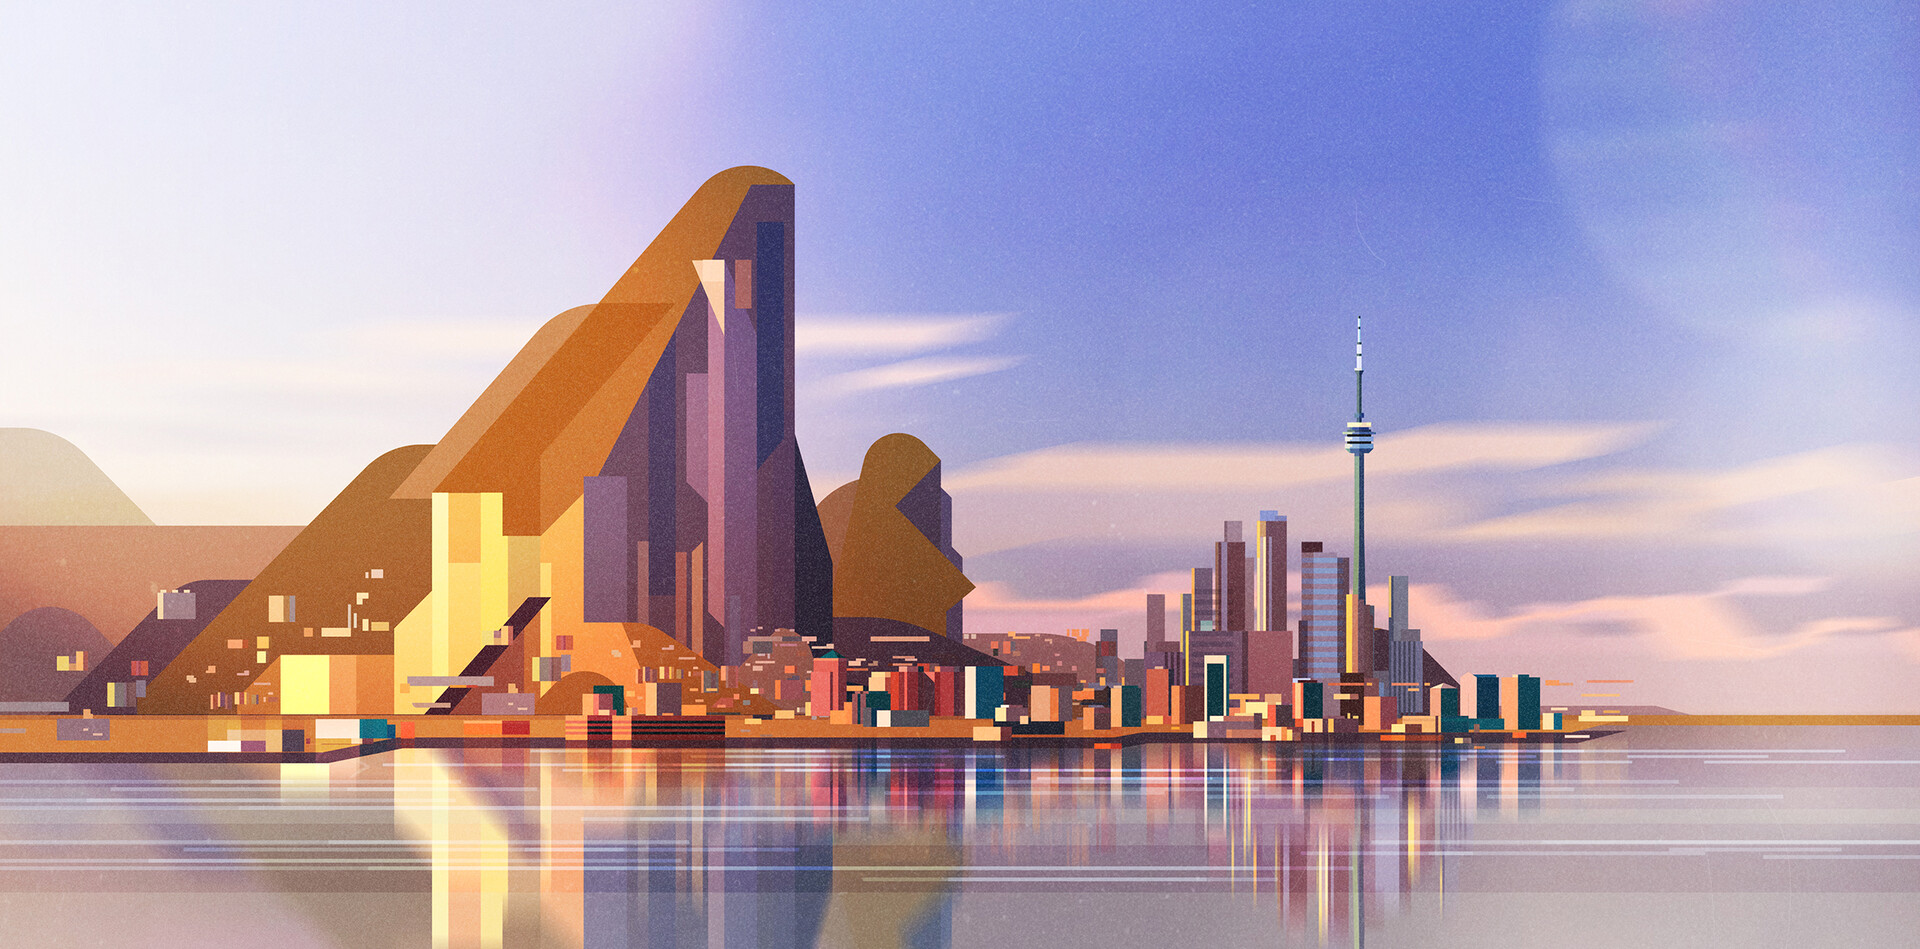 Clouds Tower Skyscraper Mountain View Sunrise Water Reflection City Building James Gilleard 1920x949